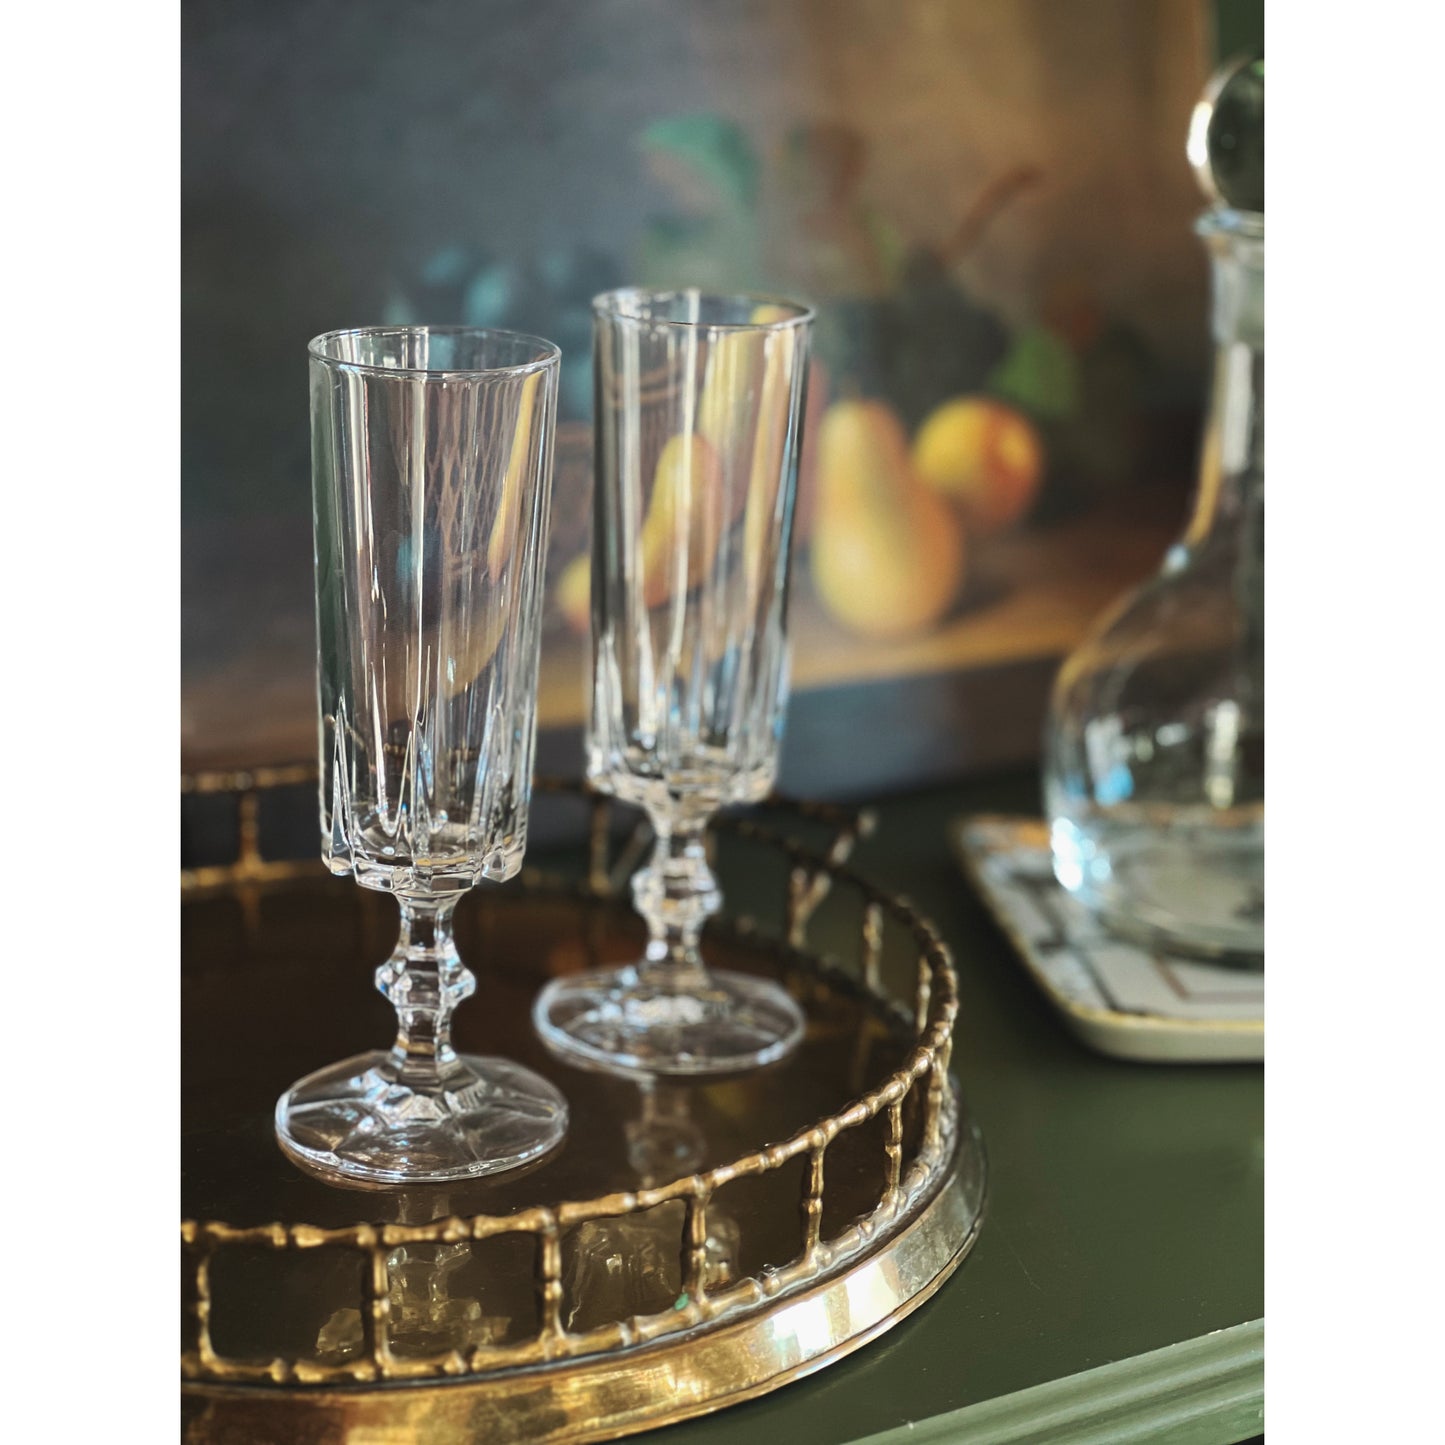 Pair of Crystal Champagne Flutes